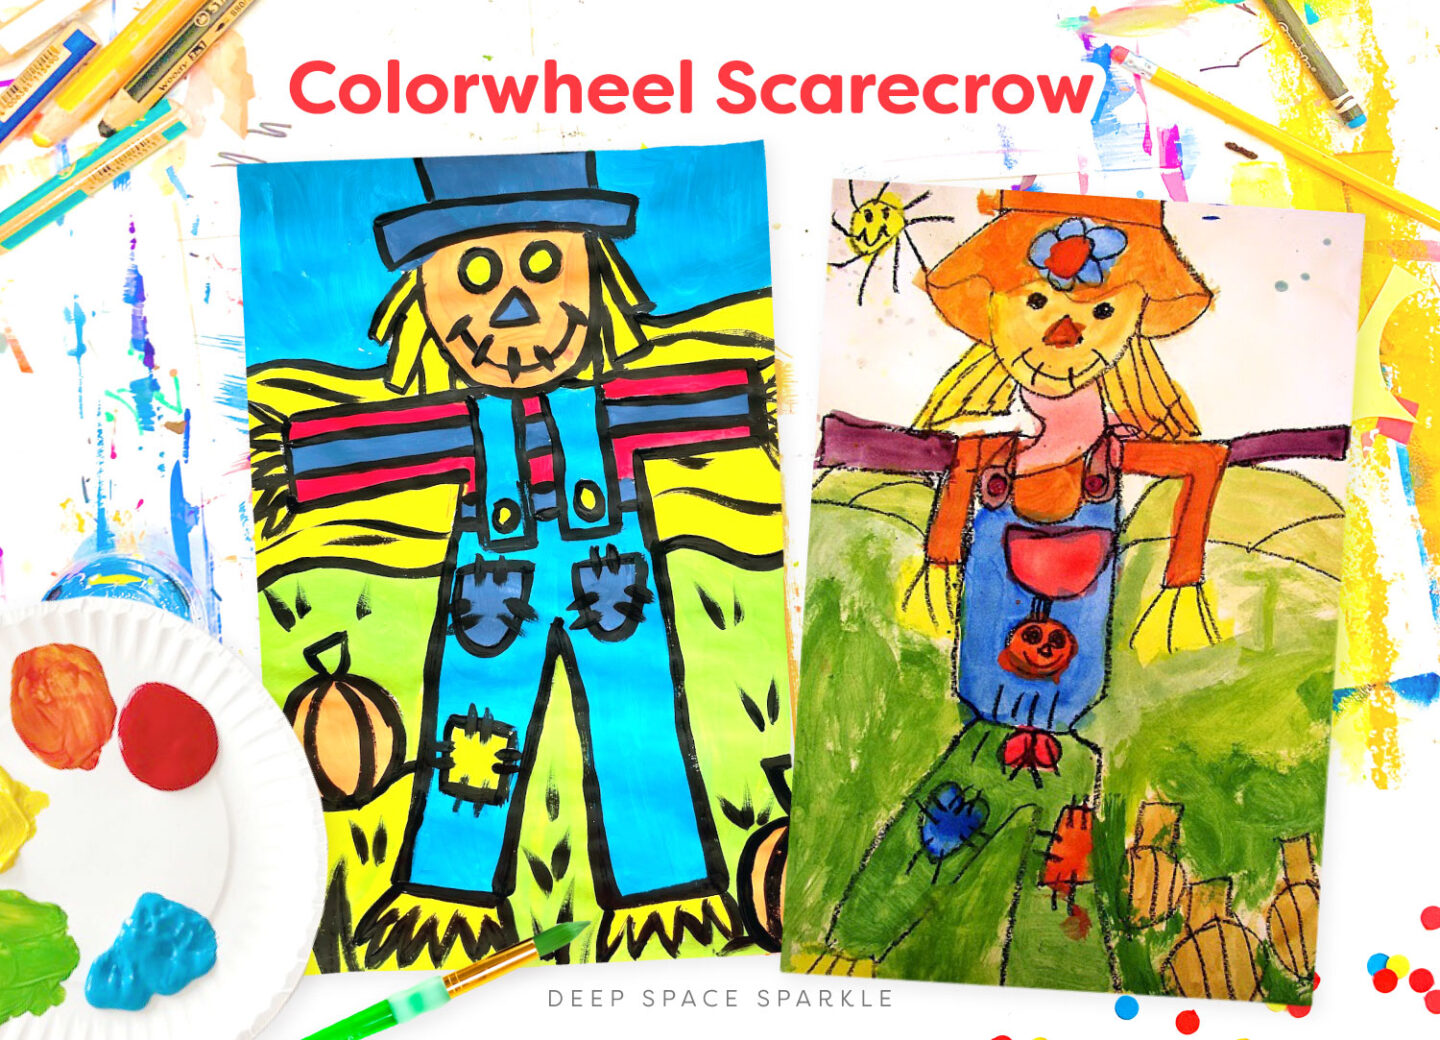 How to Teach Color Theory in the art classroom with Colorwheel Scarecrows art